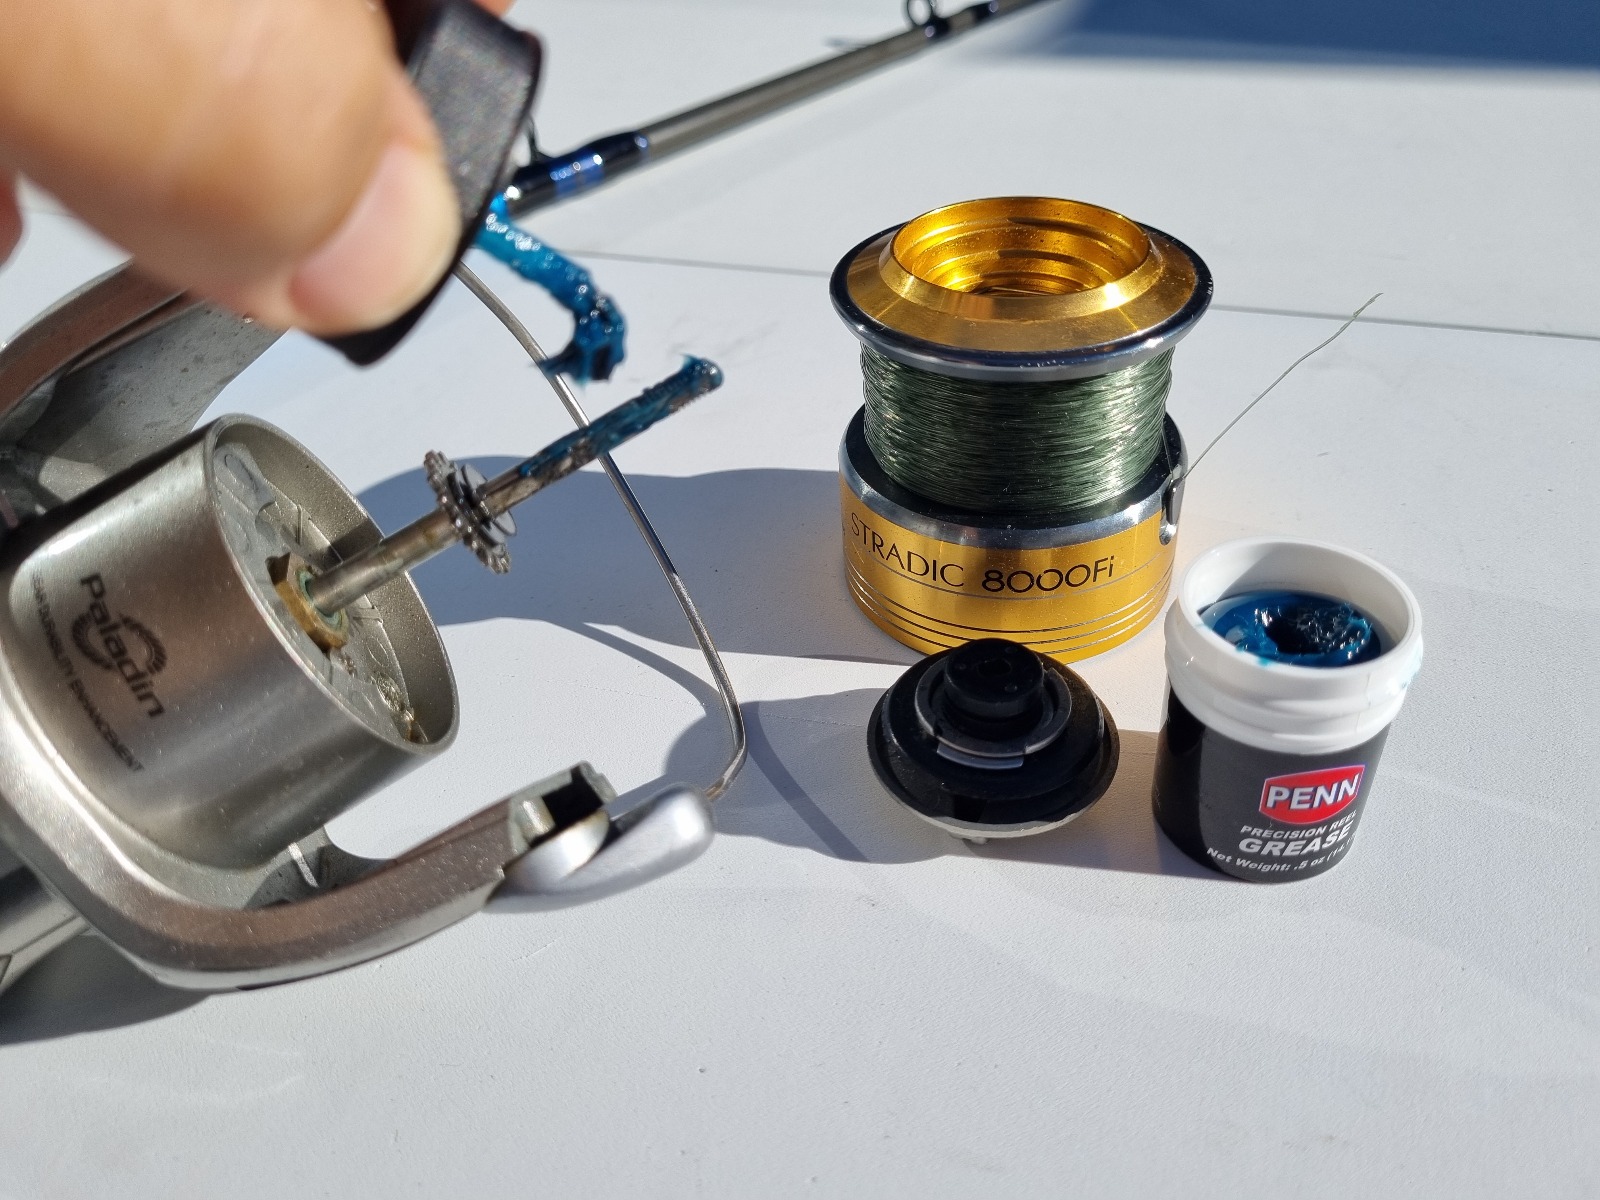 Getting the most out of your gear - Rod and reel maintenance